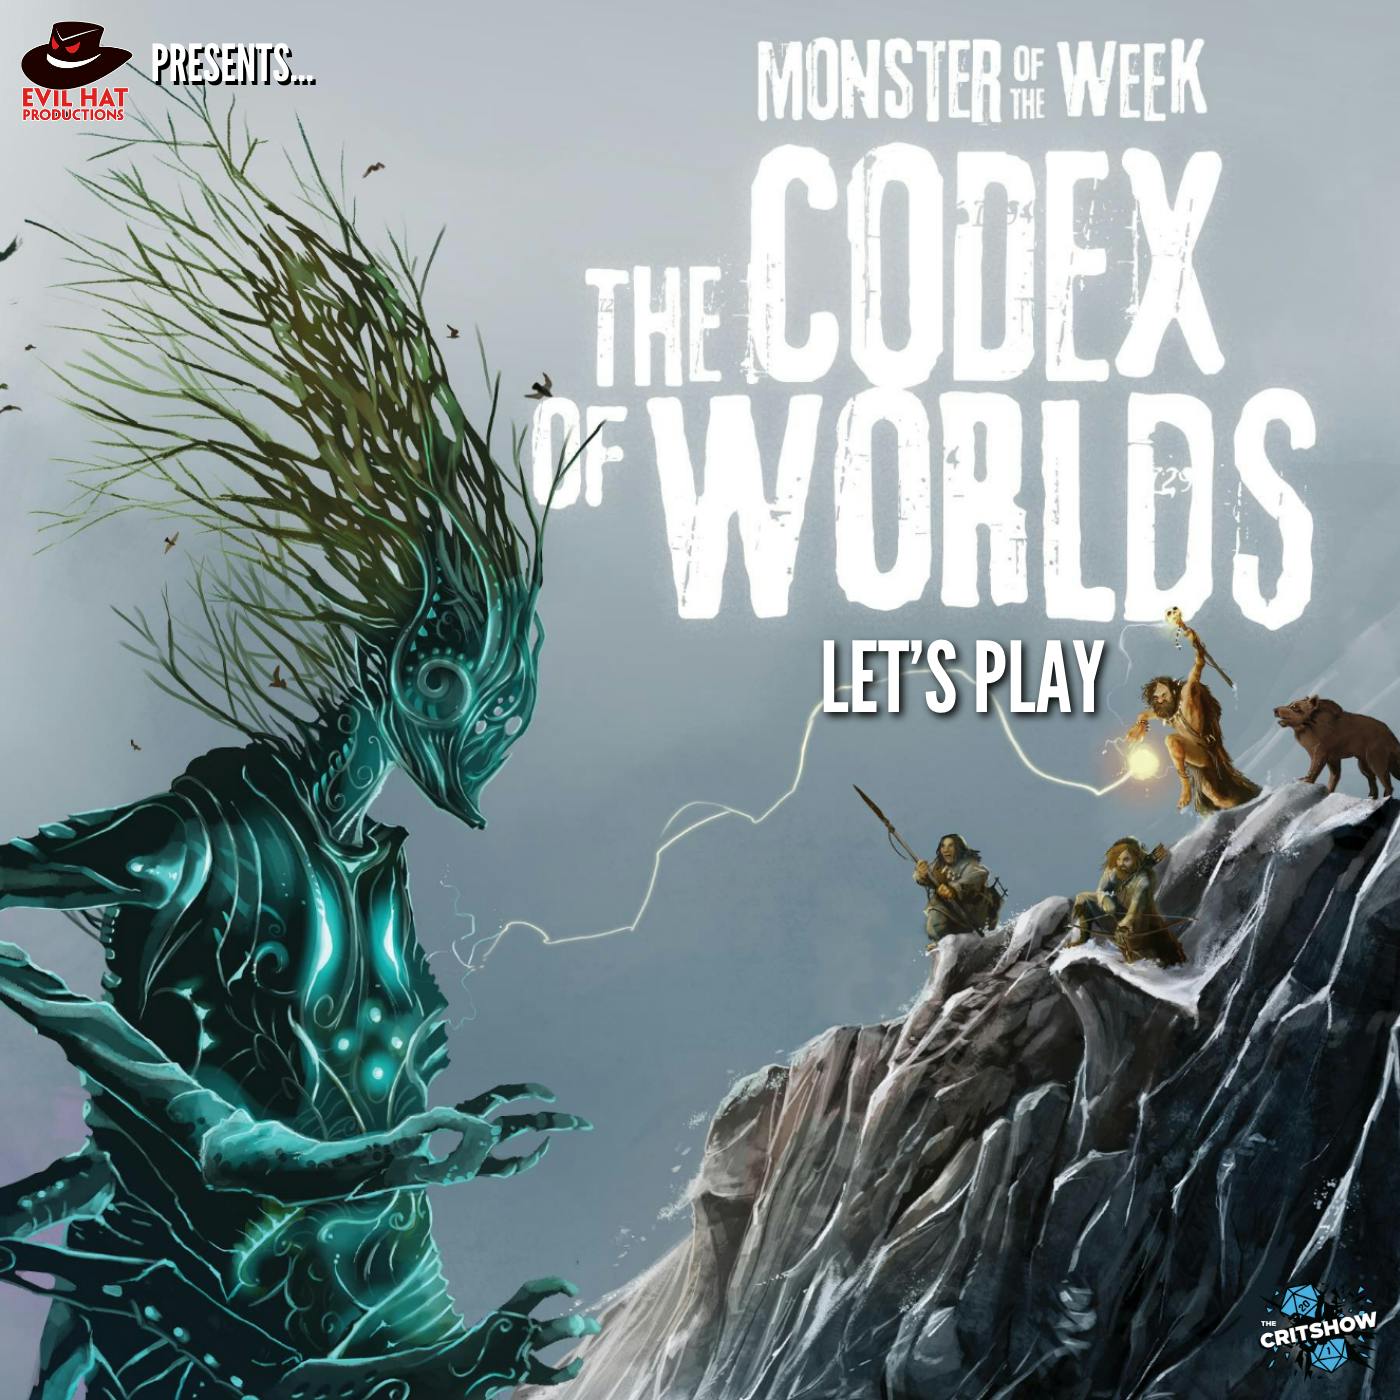 The Critshow: The Codex of Worlds (Pt 1)